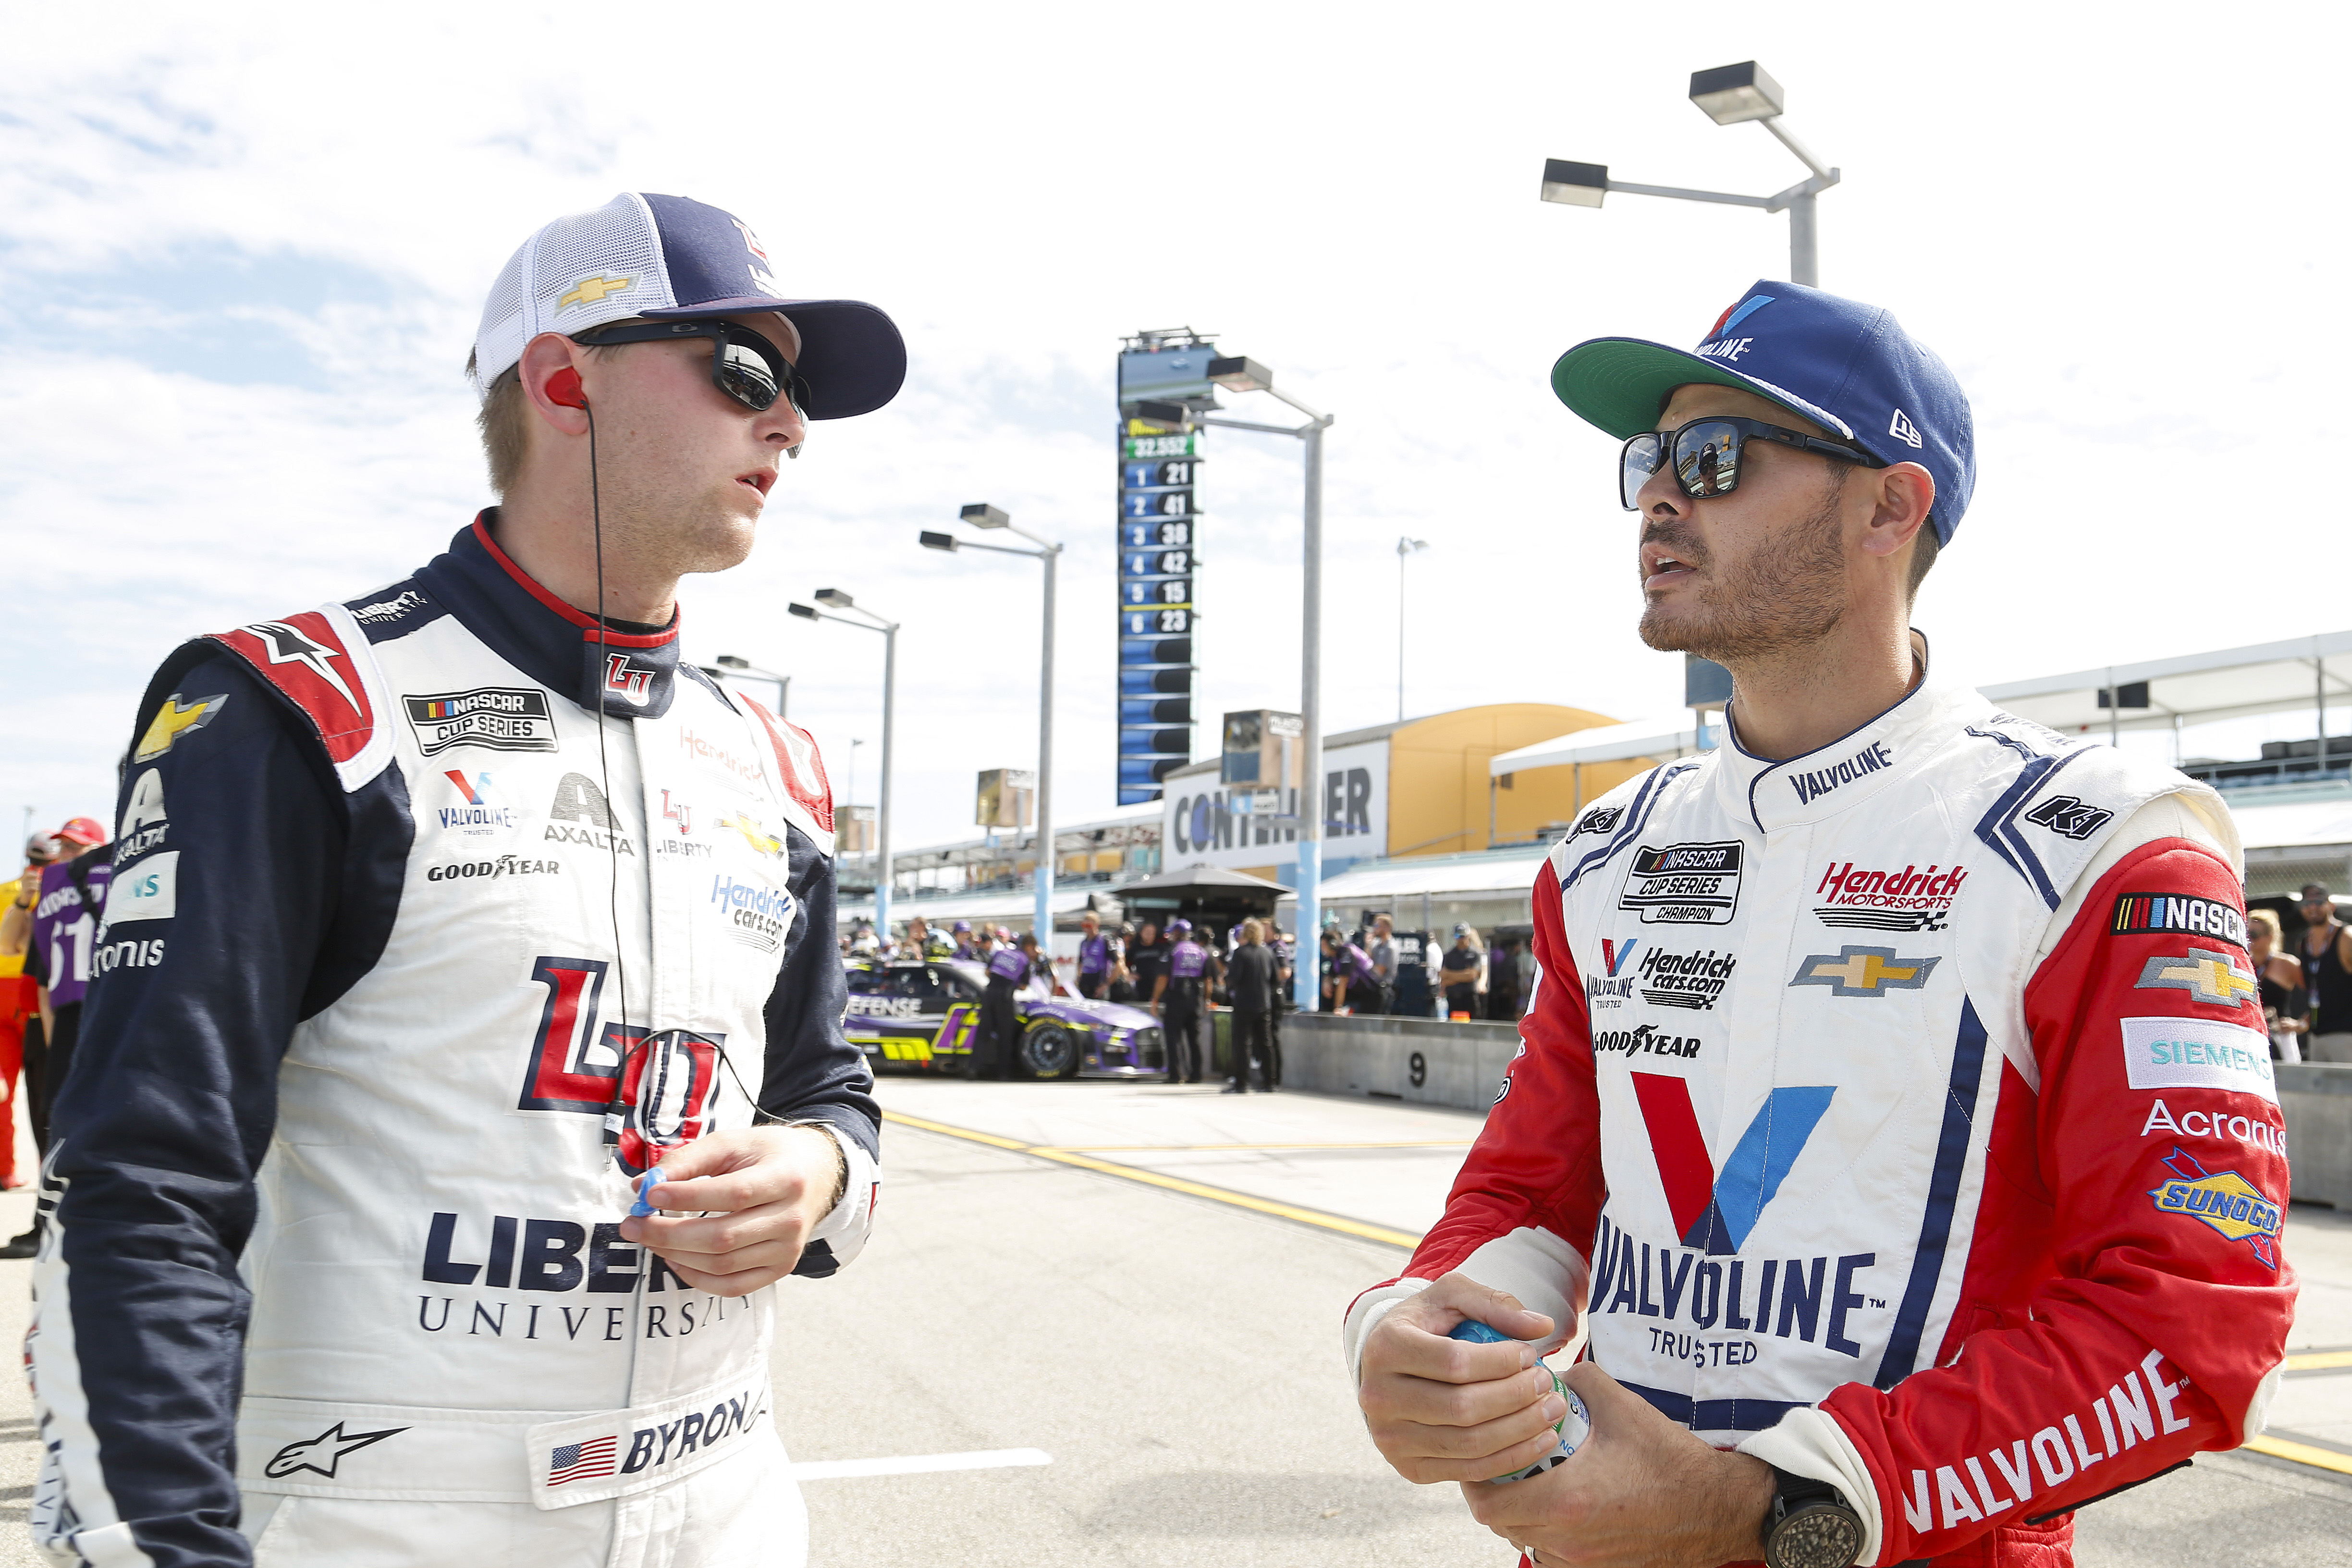 William Byron, driver of the #24 Liberty University Chevrolet,(L) and Kyle Larson, driver of the #5 Valvoline Chevrolet, talk on the grid during qualifying for the NASCAR Cup Series Dixie Vodka 400 at Homestead-Miami Speedway on October 22, 2022 in Homestead, Florida.